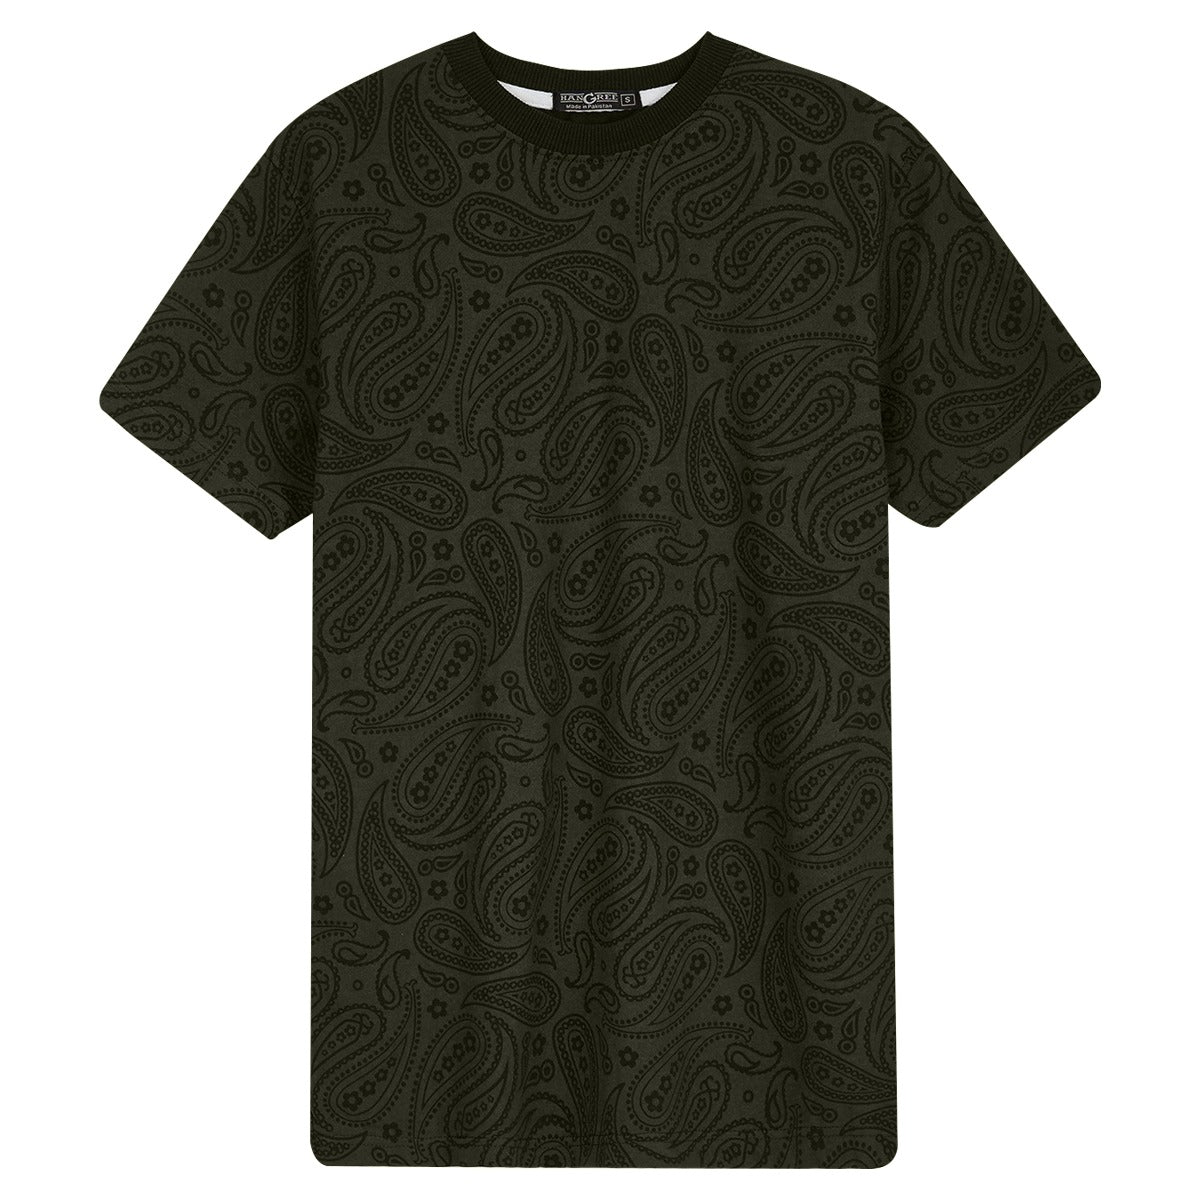 HG EXCLUSIVE ALL OVER PRINTED TEE SHIRT - GREEN